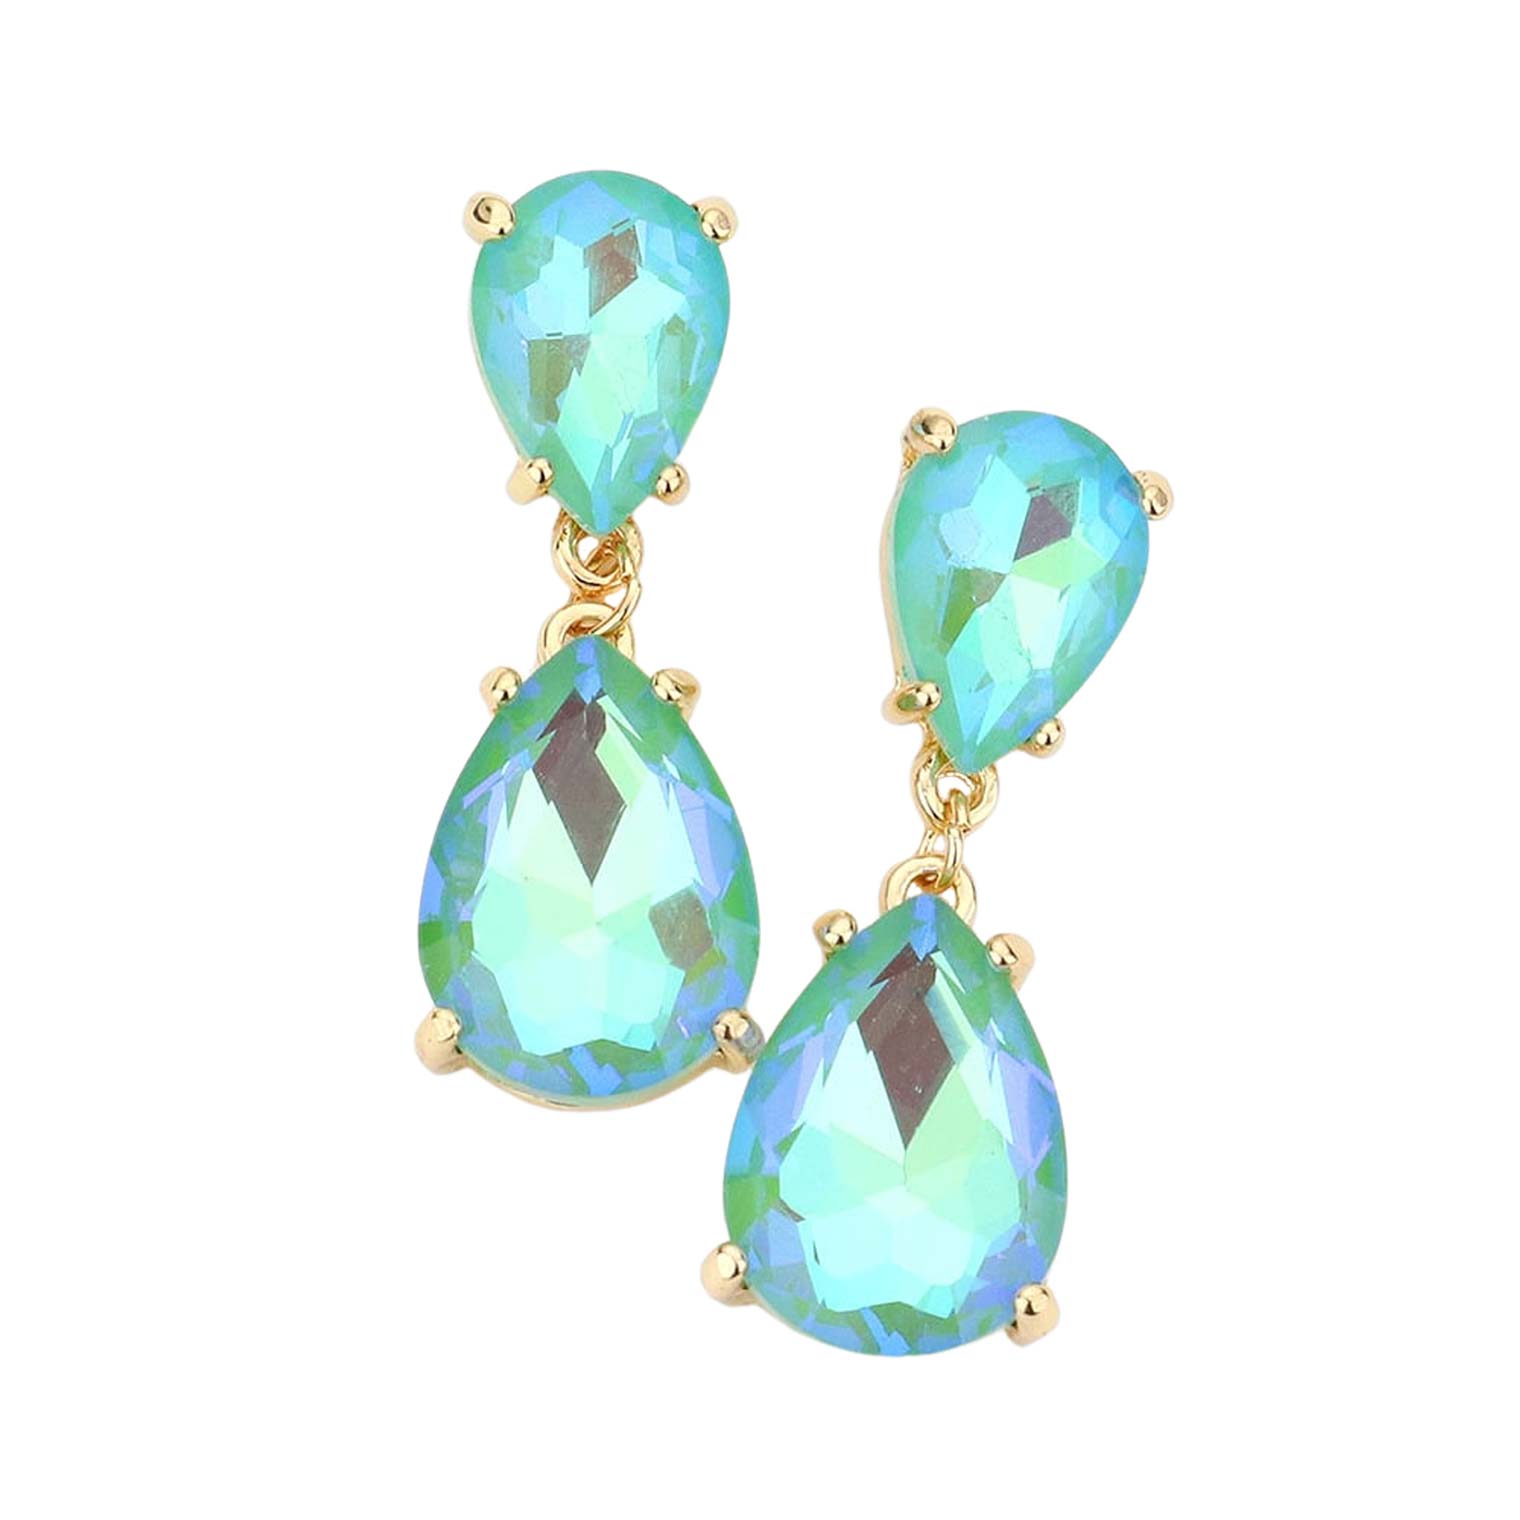 Mint Double Teardrop Link Dangle Evening Earrings, Beautiful teardrop-shaped dangle drop earrings. These elegant, comfortable earrings can be worn all day to dress up any outfit. Wear a pop of shine to complete your ensemble with a classy style. The perfect accessory for adding just the right amount of shimmer and a touch of class to special events. Jewelry that fits your lifestyle and makes your moments awesome!